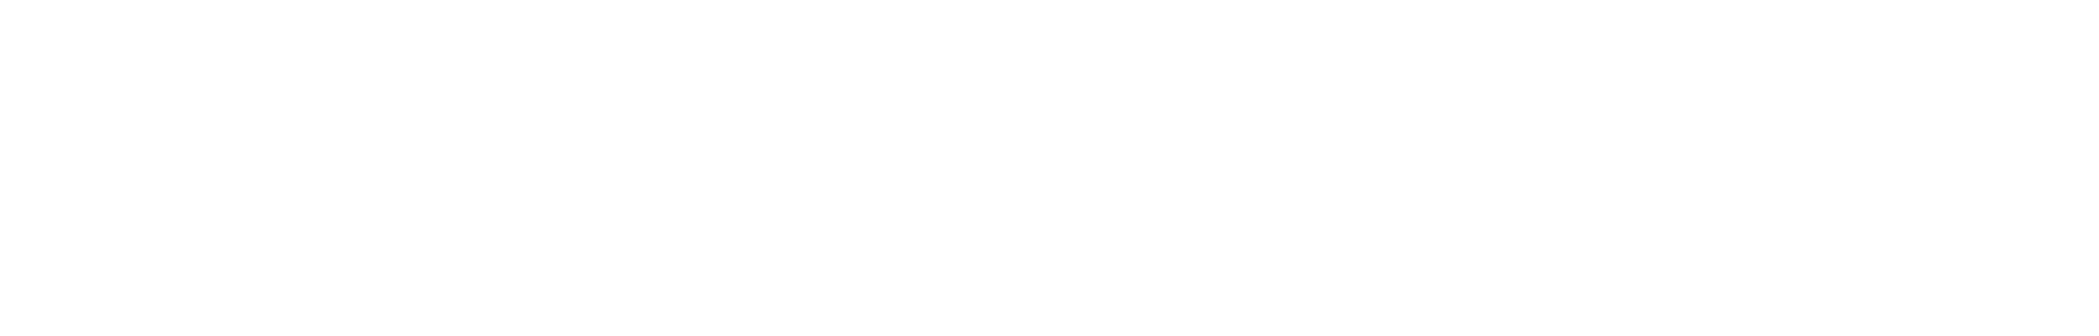 Partnering with Research Data Support to support open data and reproducibility